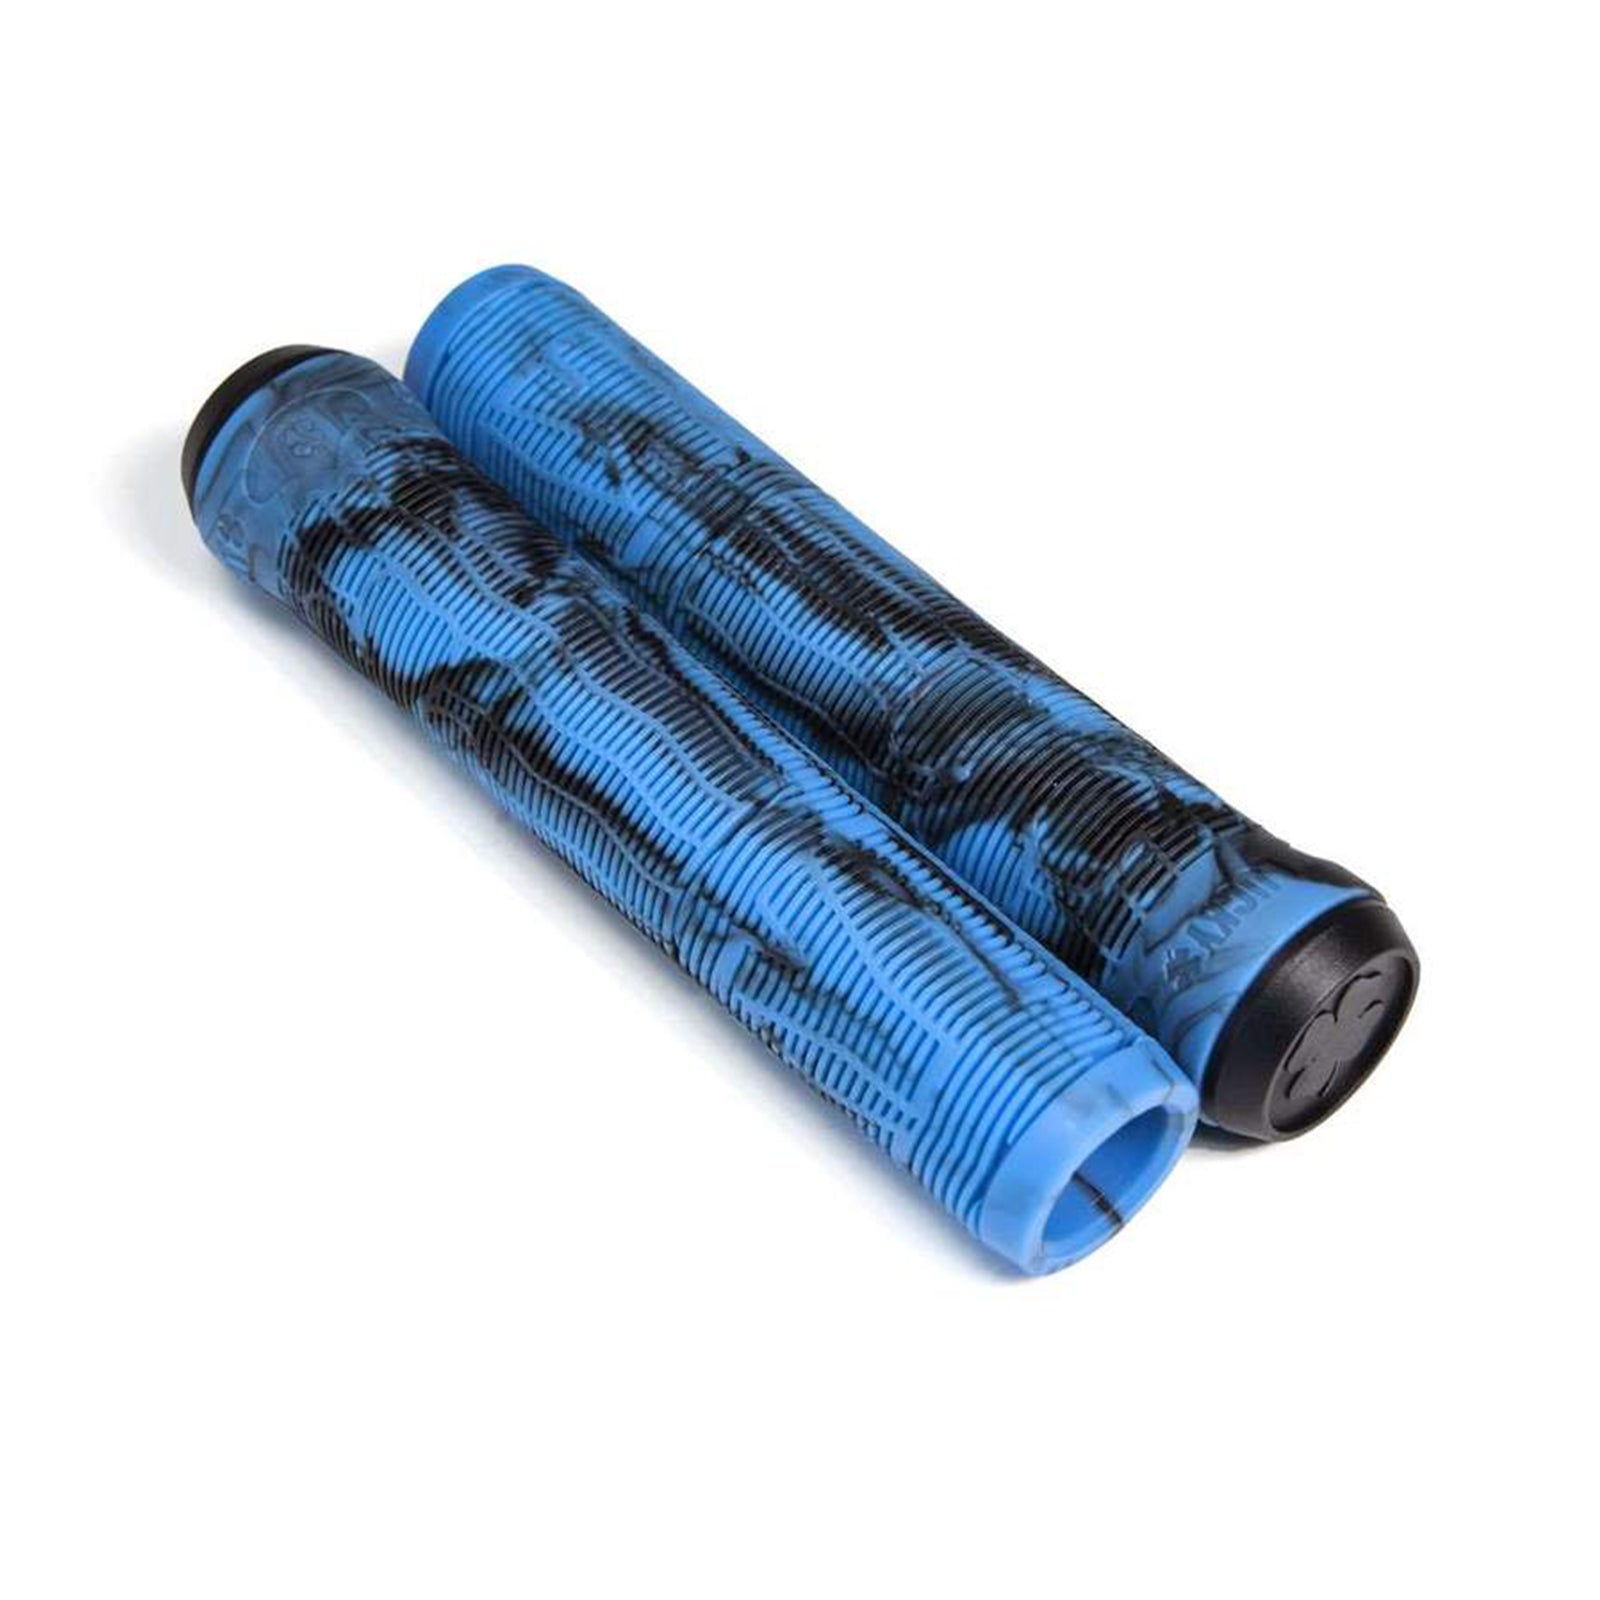 Lucky ViceGrips 2.0 Grips Blue/Black